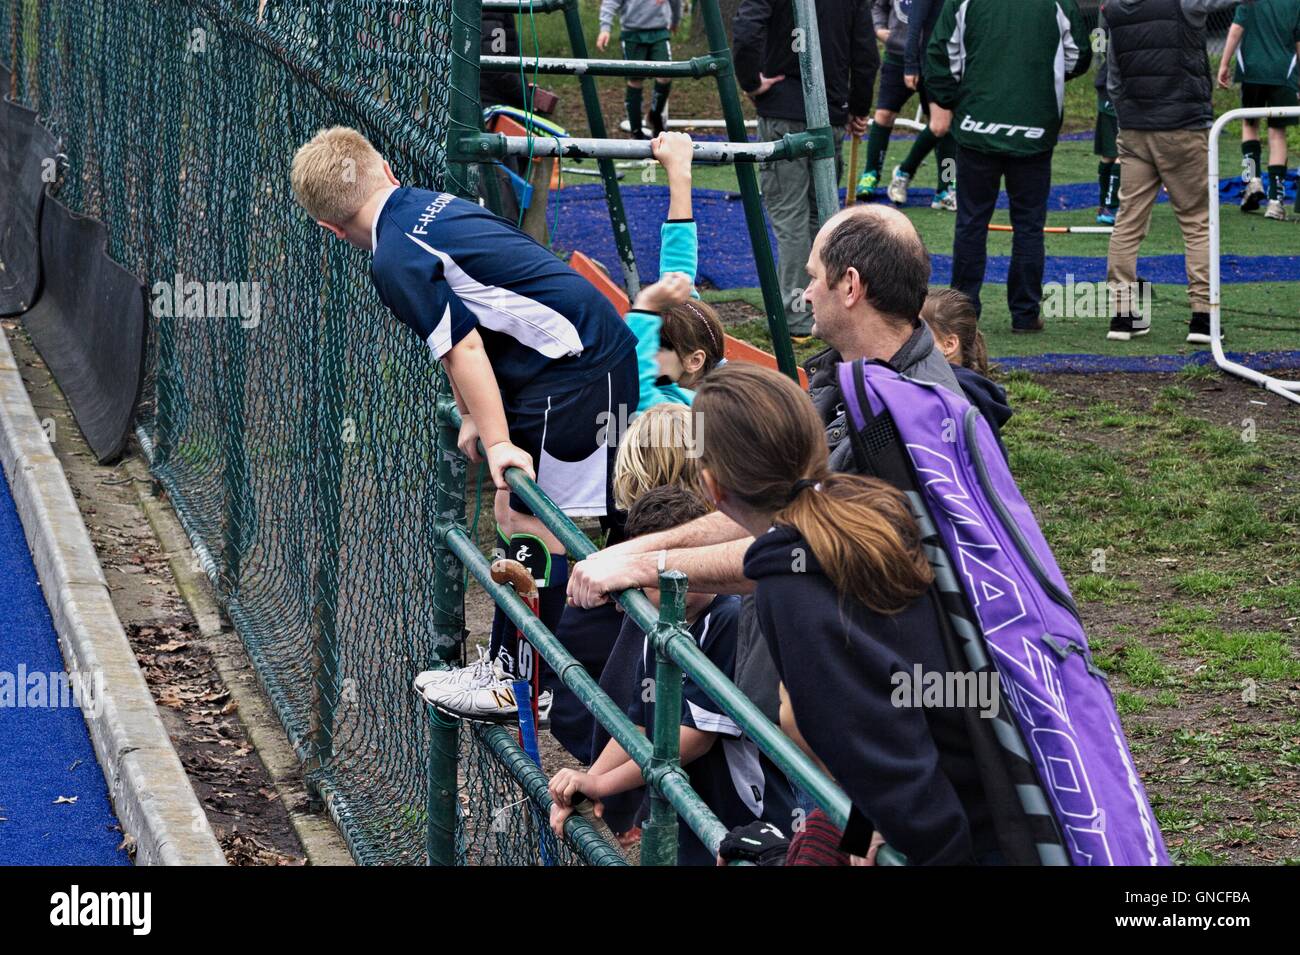 Junior field hockey players watching a hockey game from behind a fence, with their coach. Stock Photo